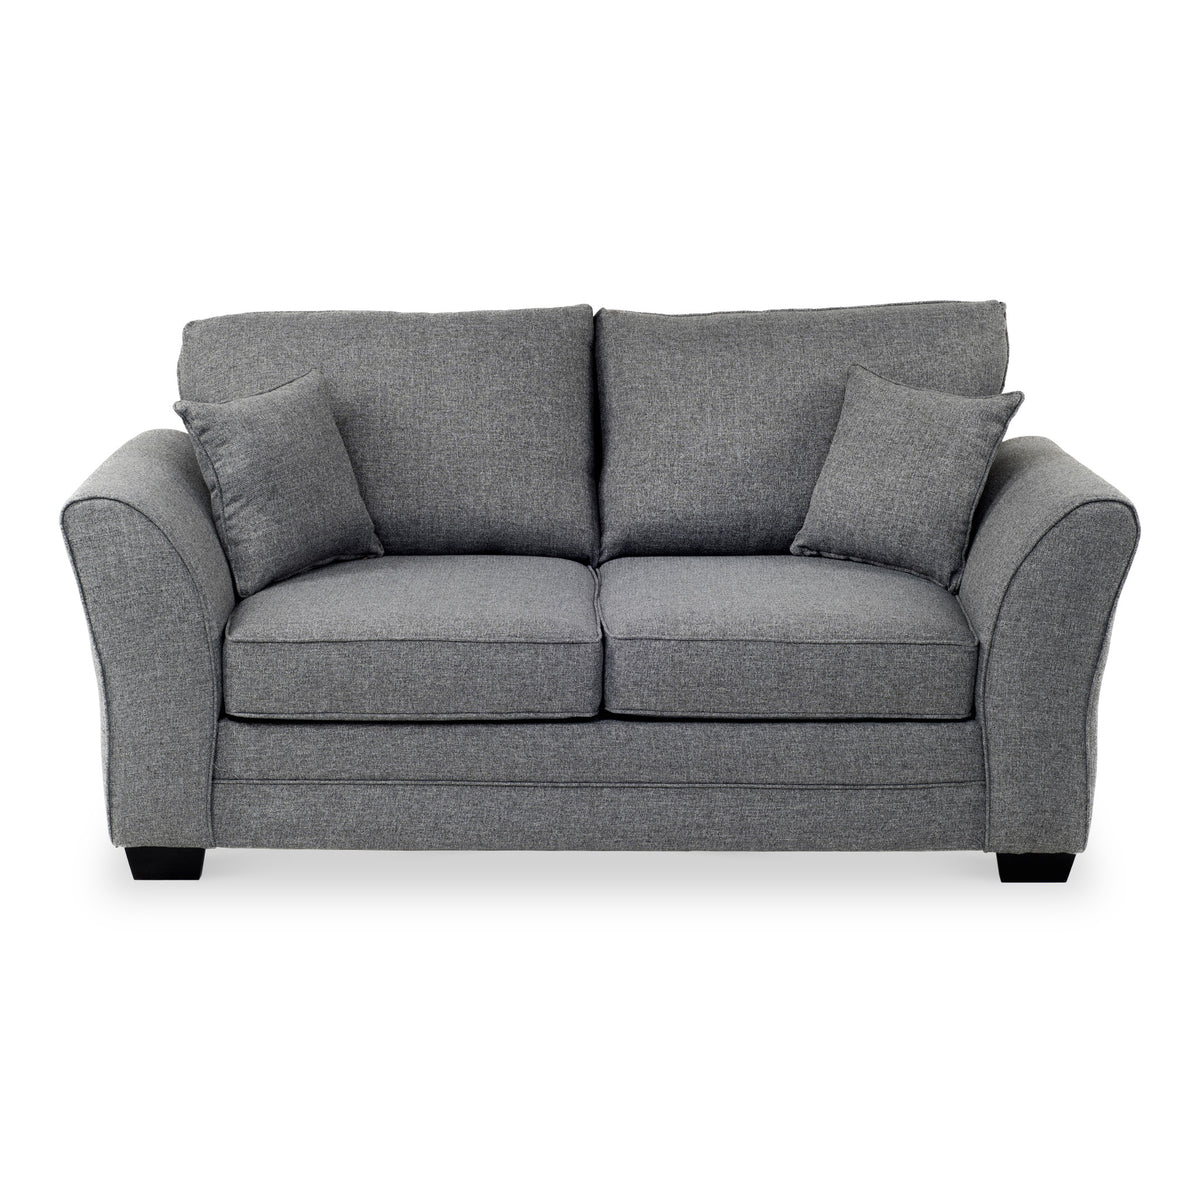 St Ives Corner Sofa Bed in Charcoal by Roseland Furniture